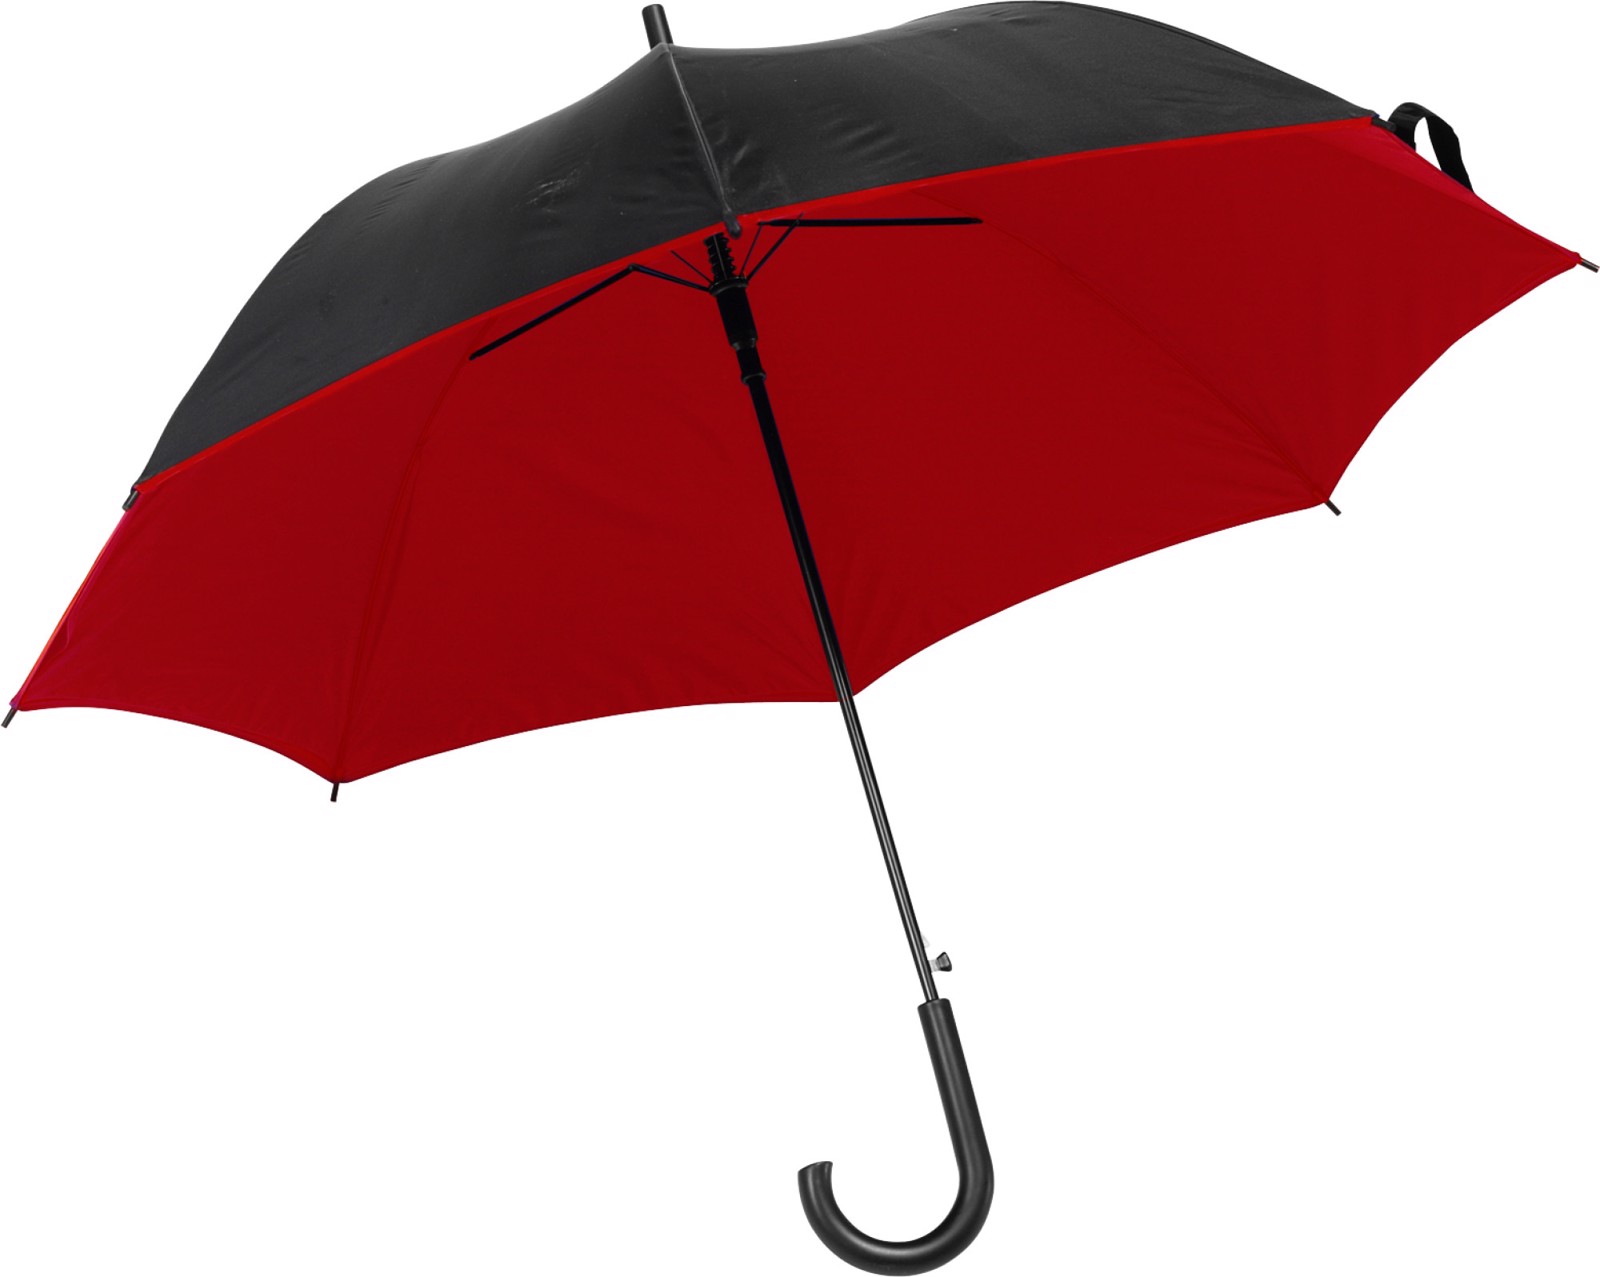 Polyester (190T) umbrella - Red